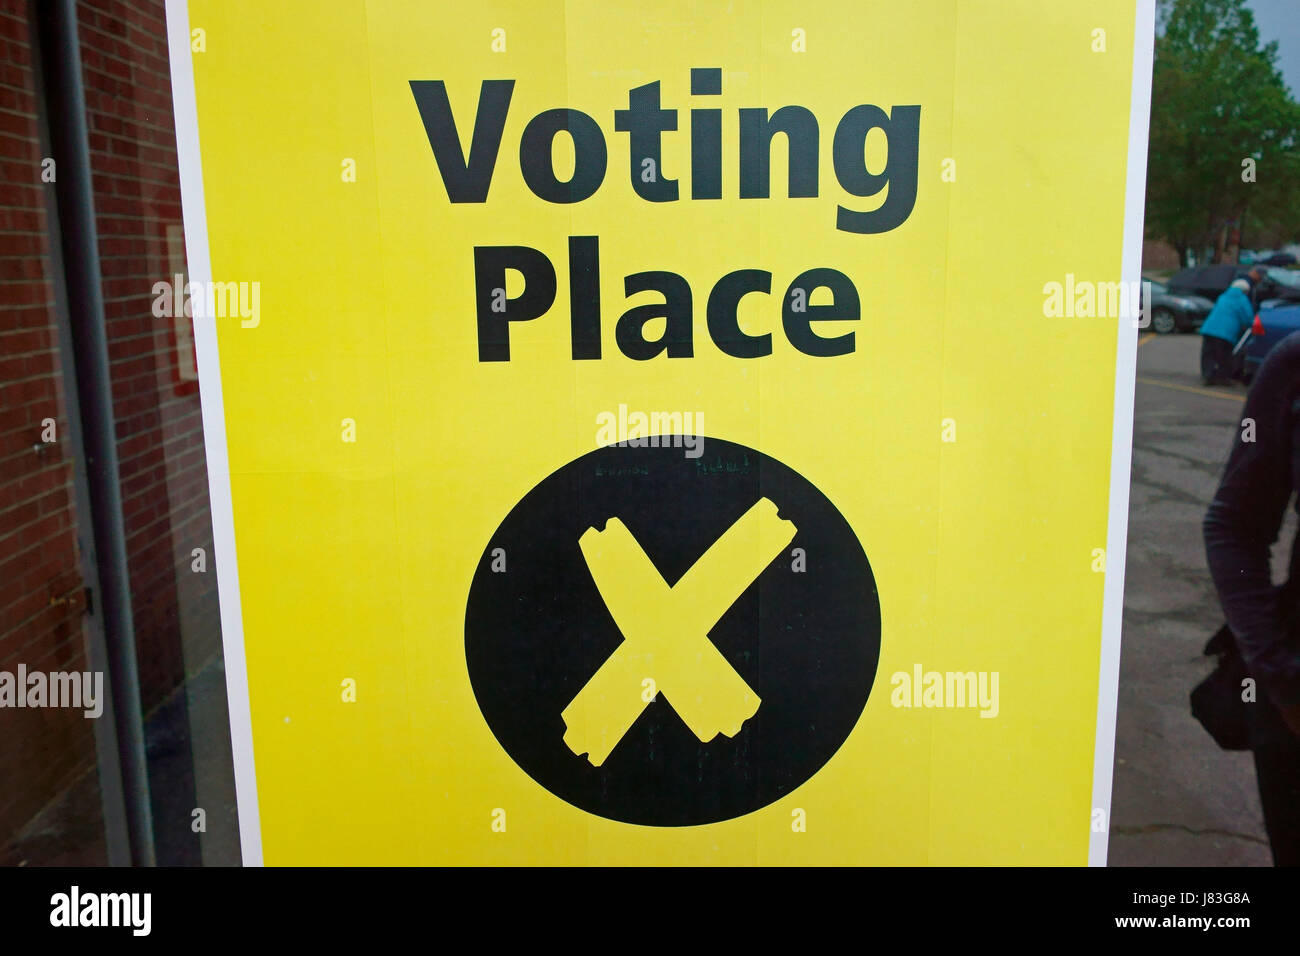 A voting place sign where people can vote in a political election Stock Photo